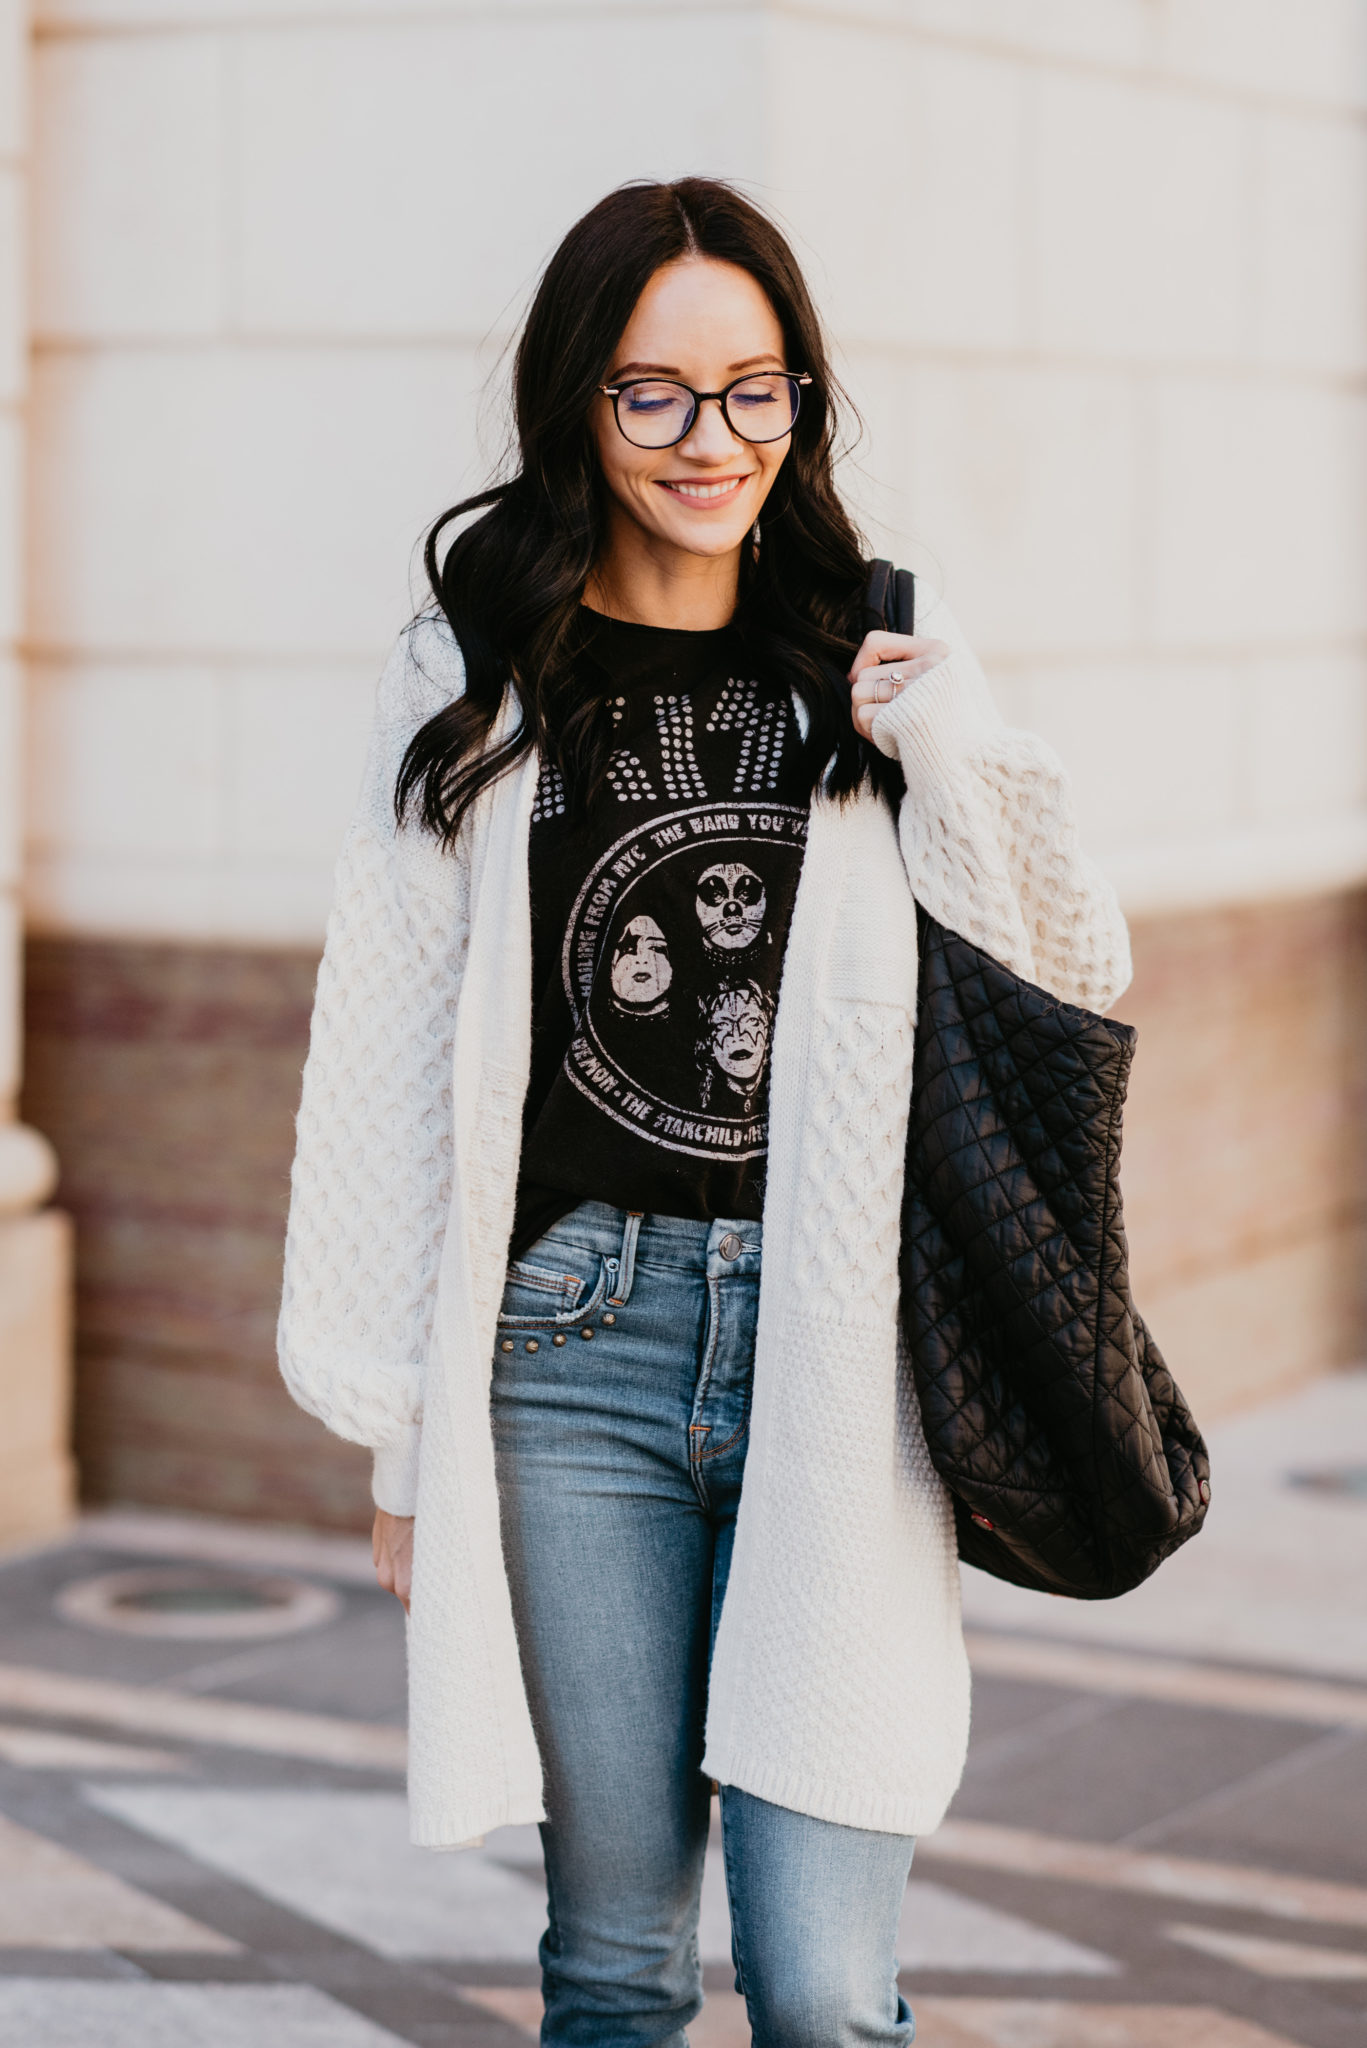 Cute Spring Tees Roundup featured by top US fashion blog, Outfits & Outings: image of a woman wearing a John Varvatos KISS graphic tee.